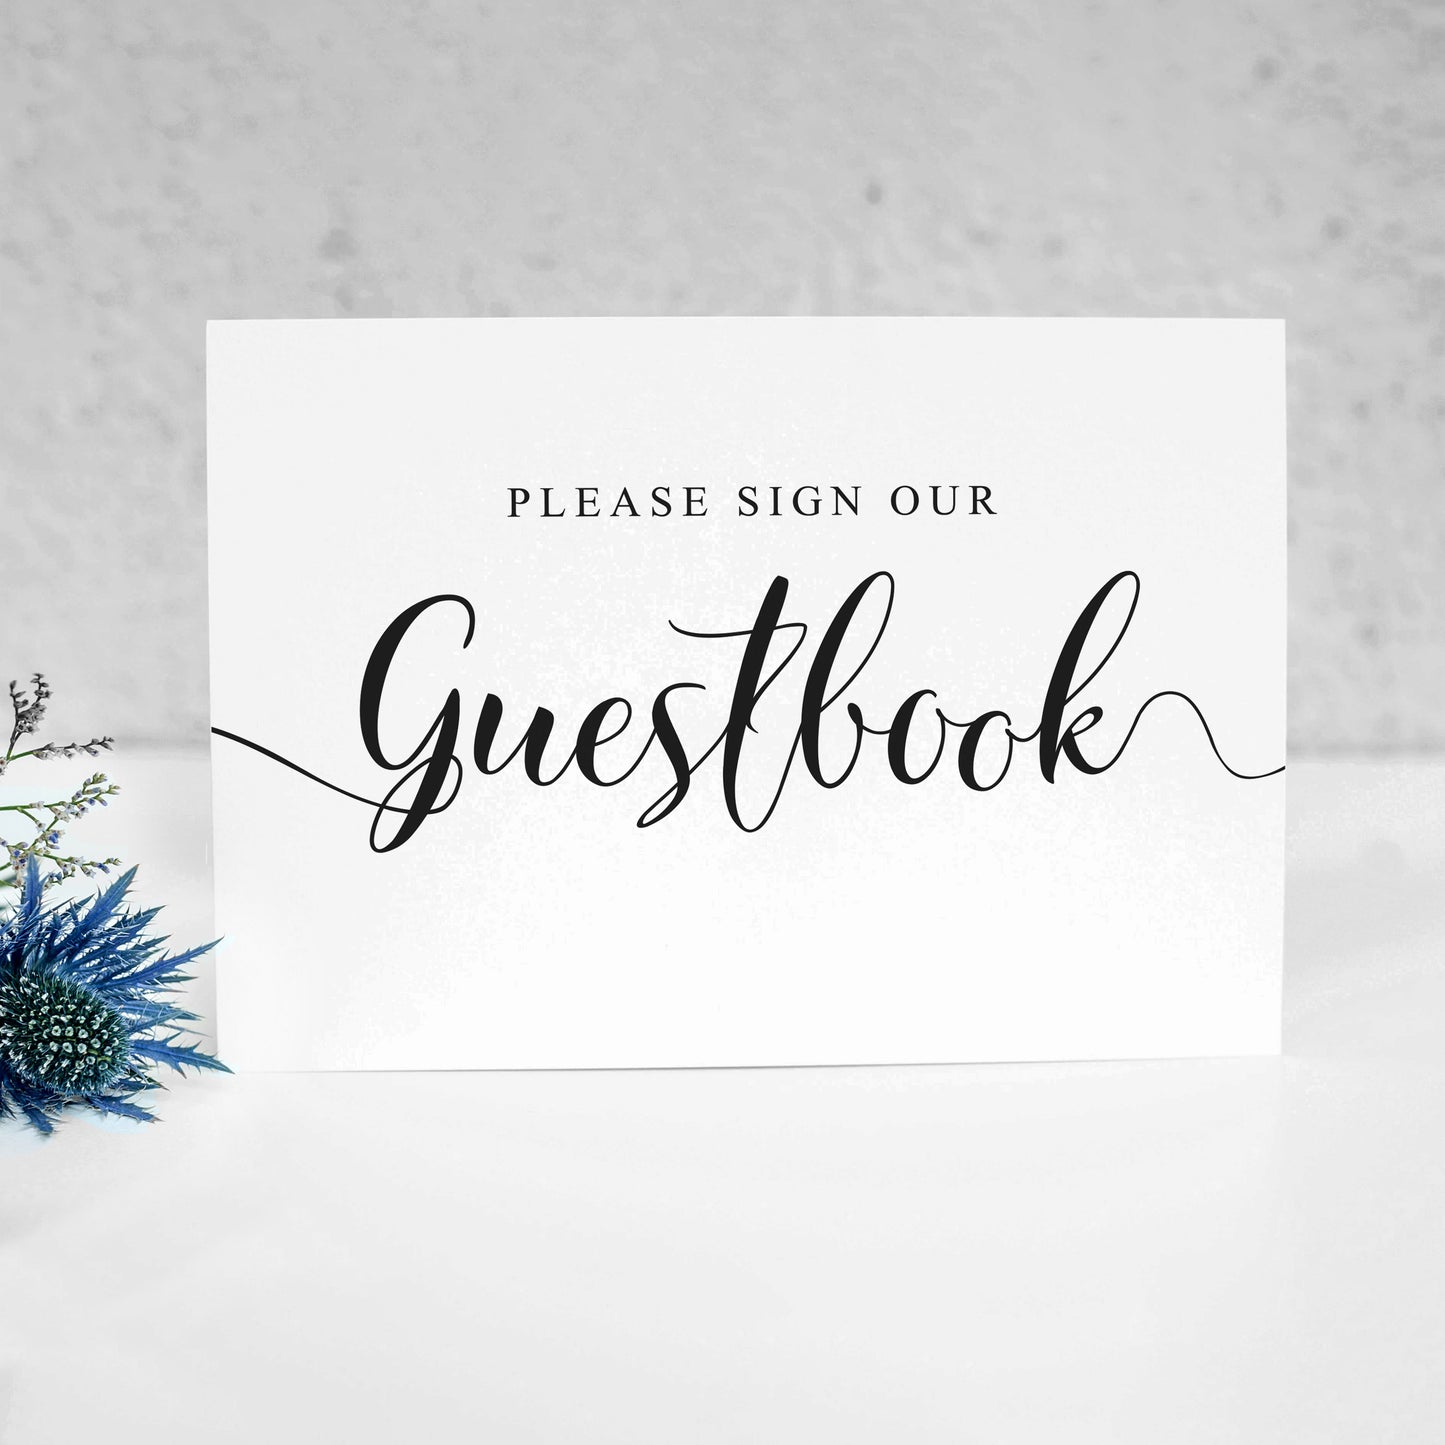 Wedding guestbook sign printed onto card standing on a table